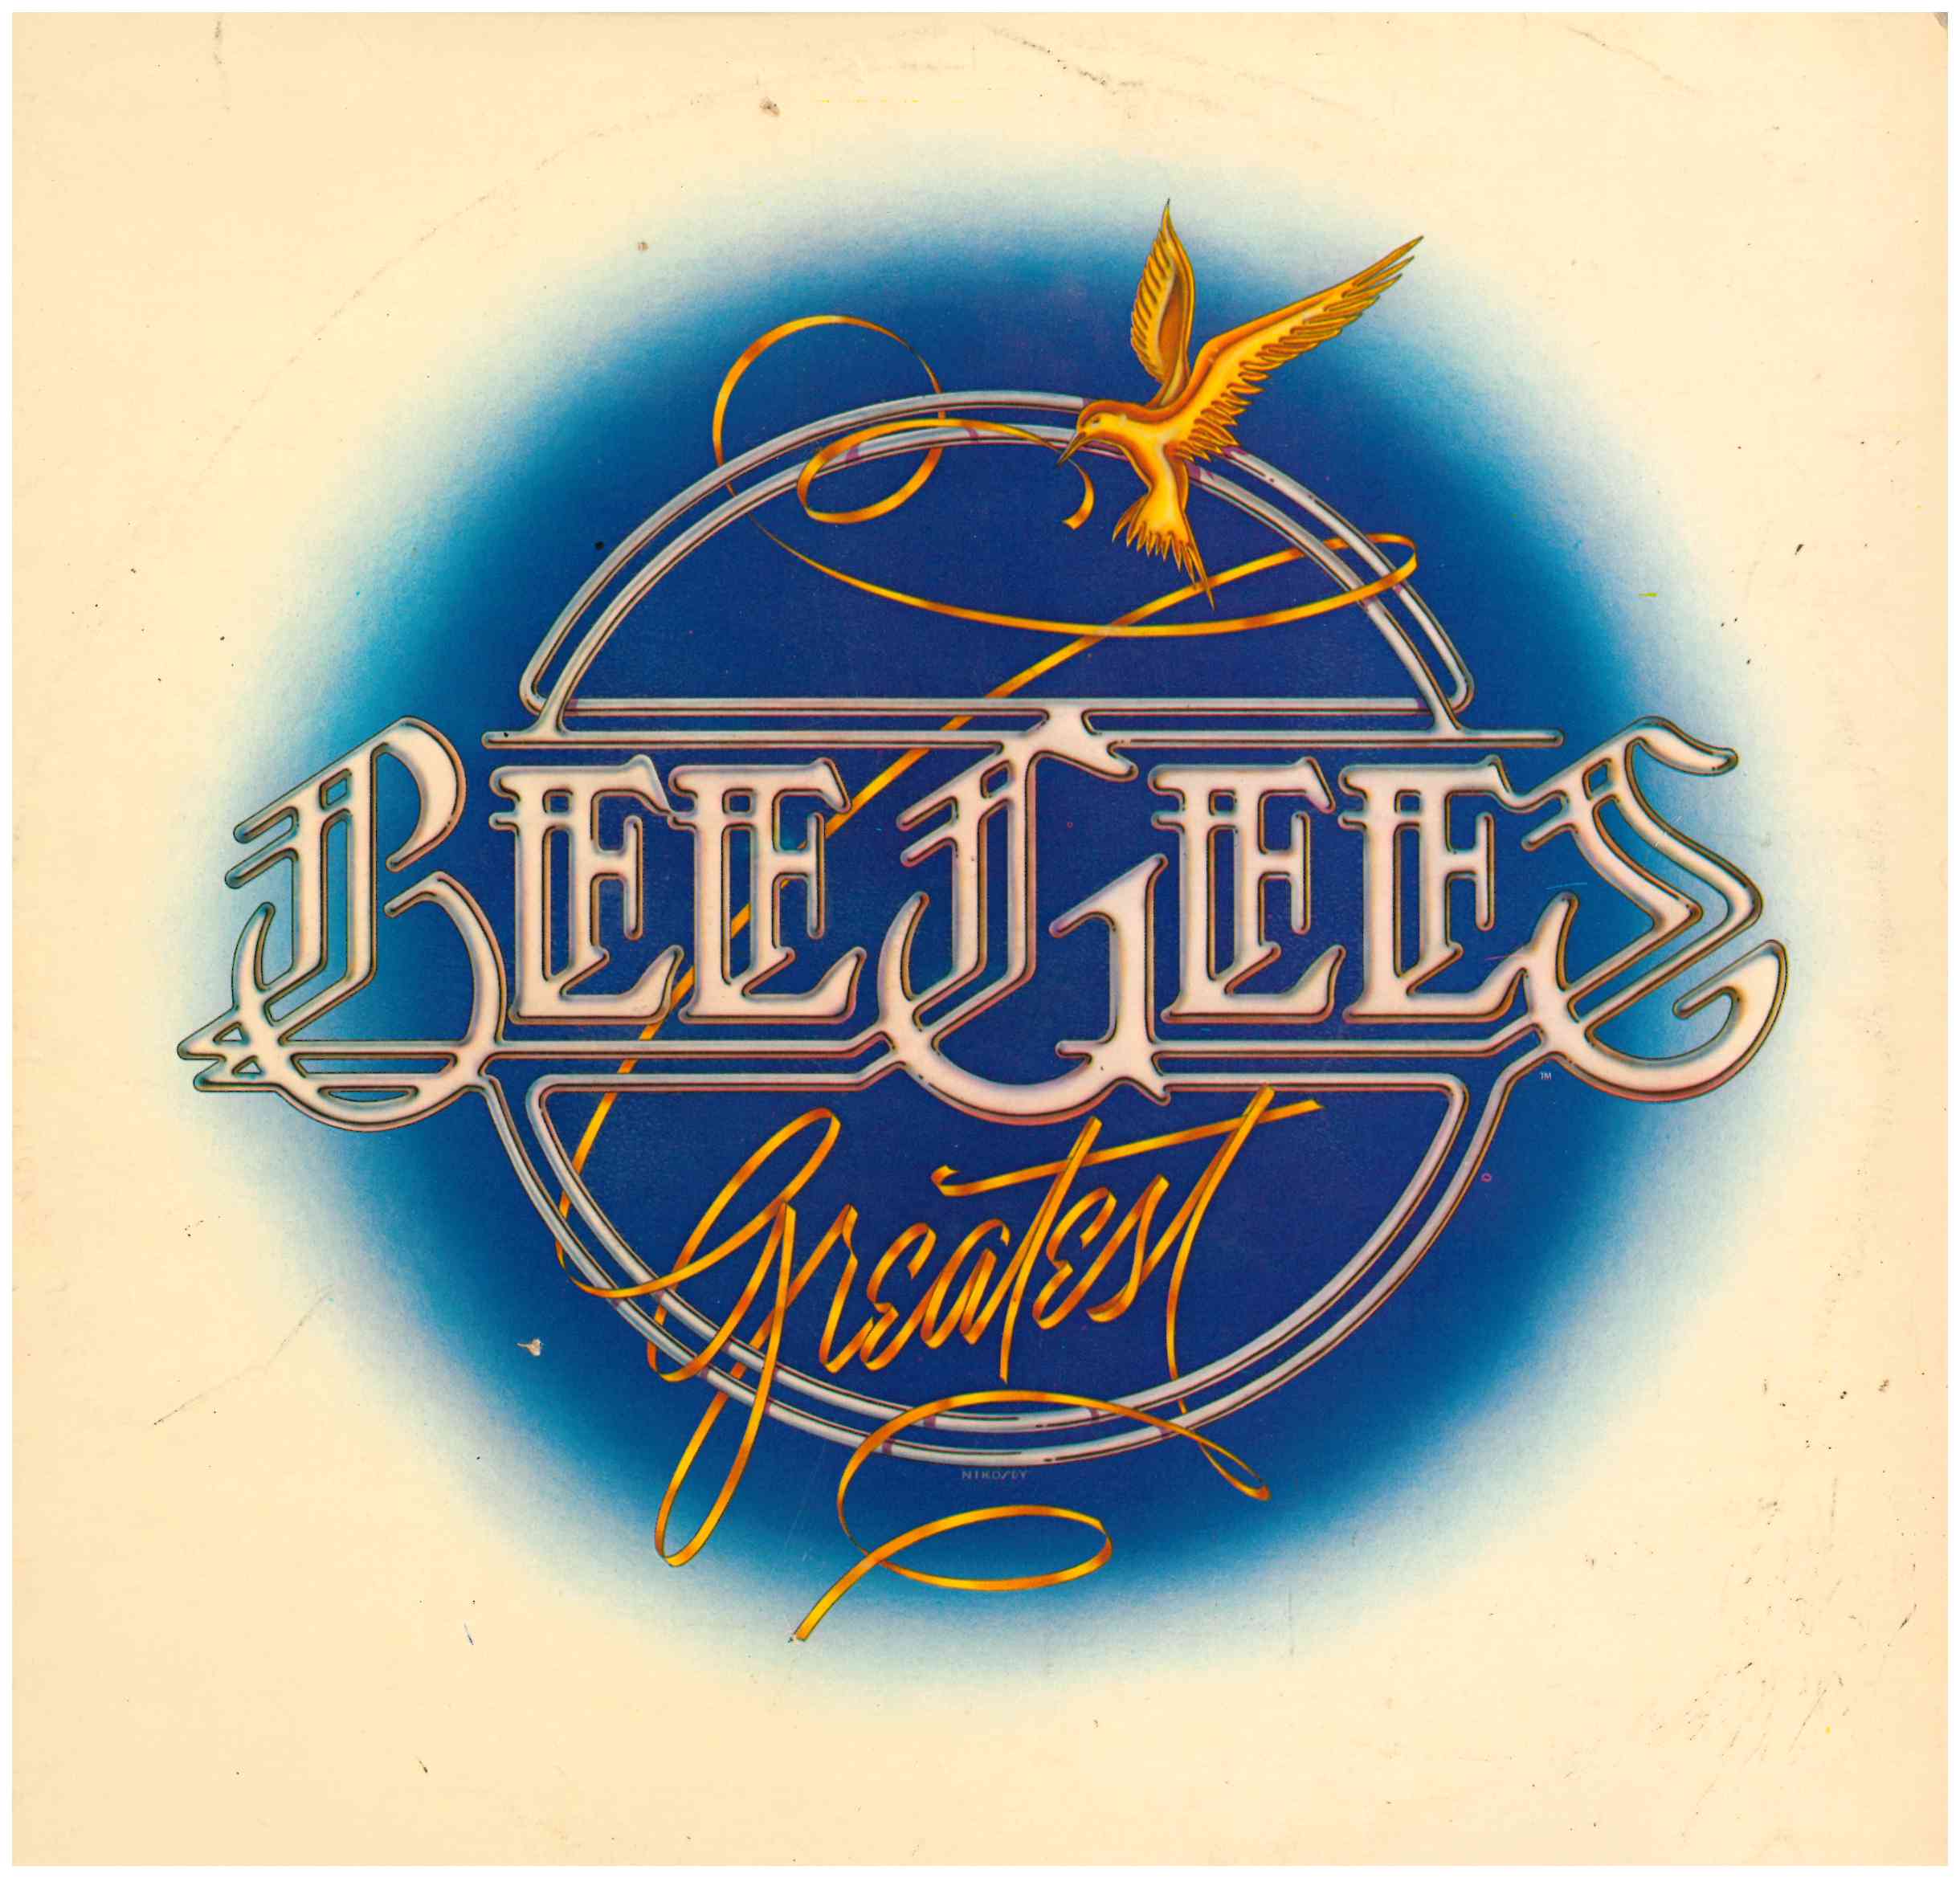 Bee Gees. Greatest. Doble LP. RSO 1979 (2658 133)